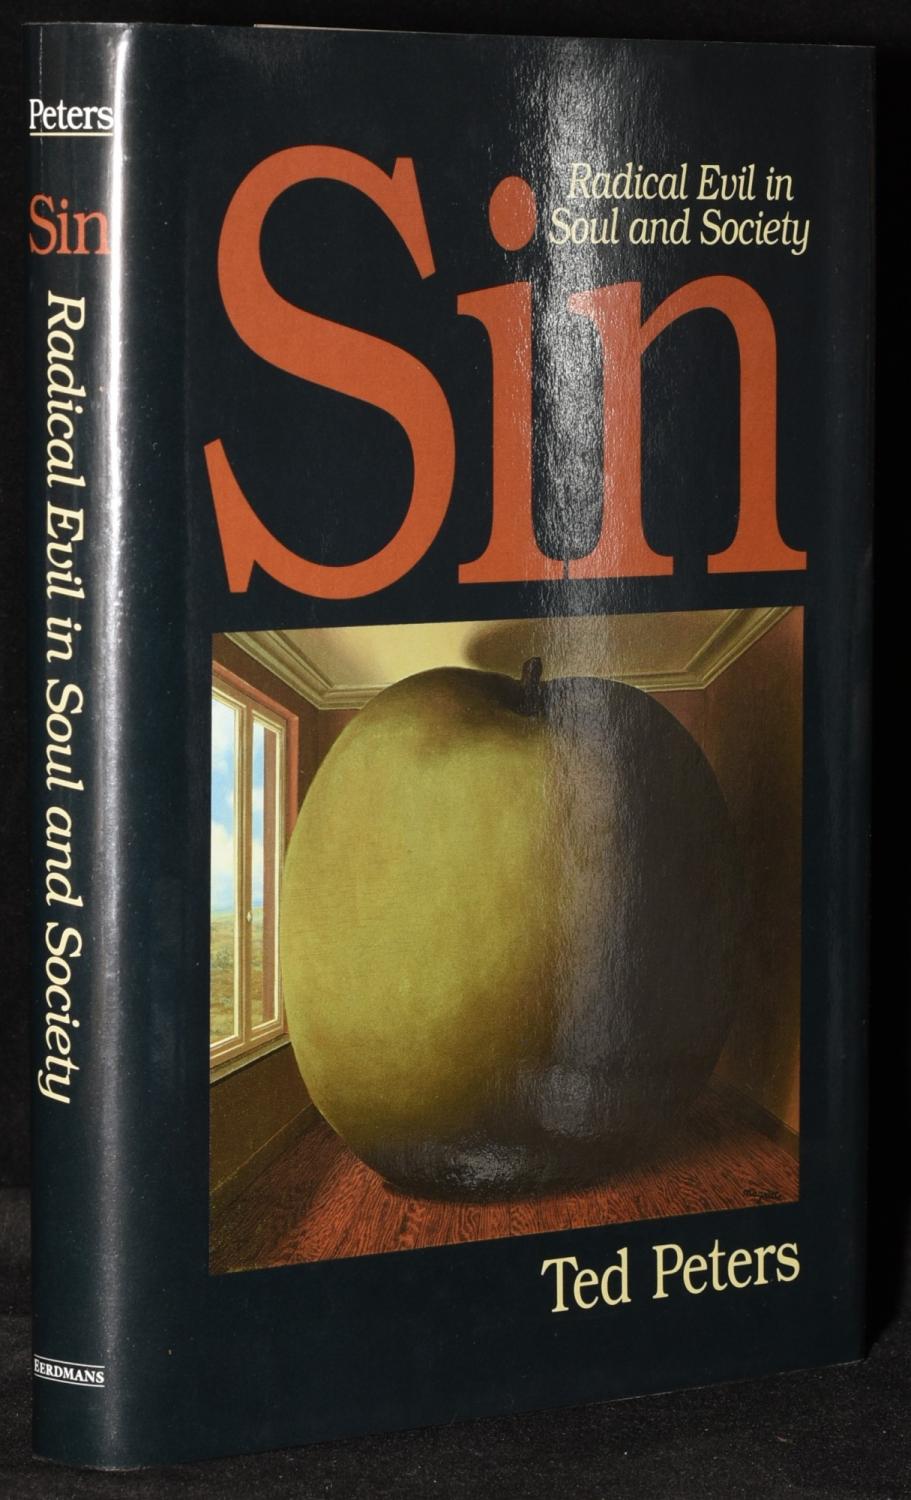 SIN: RADICAL EVIL IN SOUL AND SOCIETY - Ted Peters